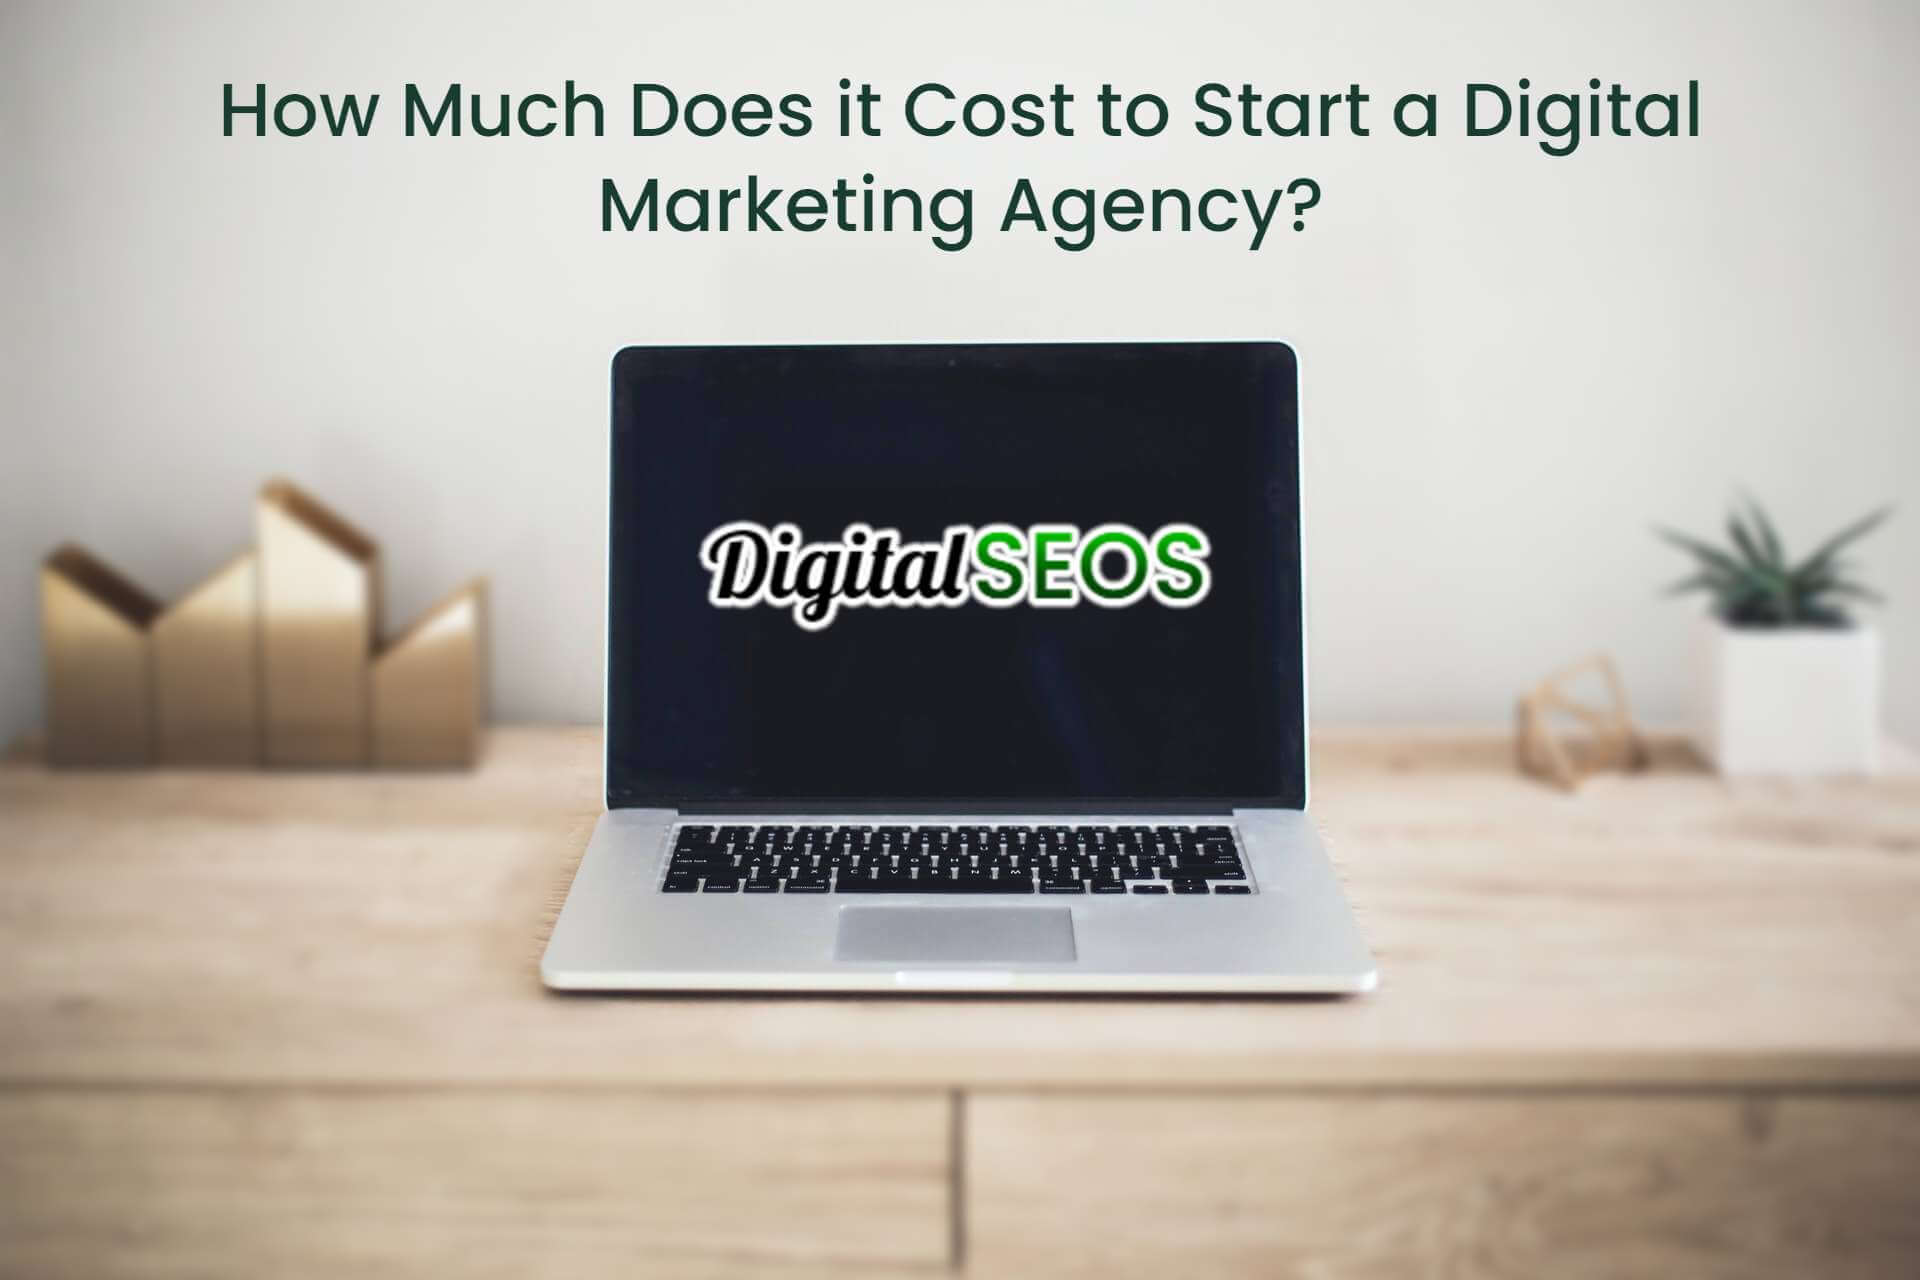 How Much Does it Cost to Start a Digital Marketing Agency?